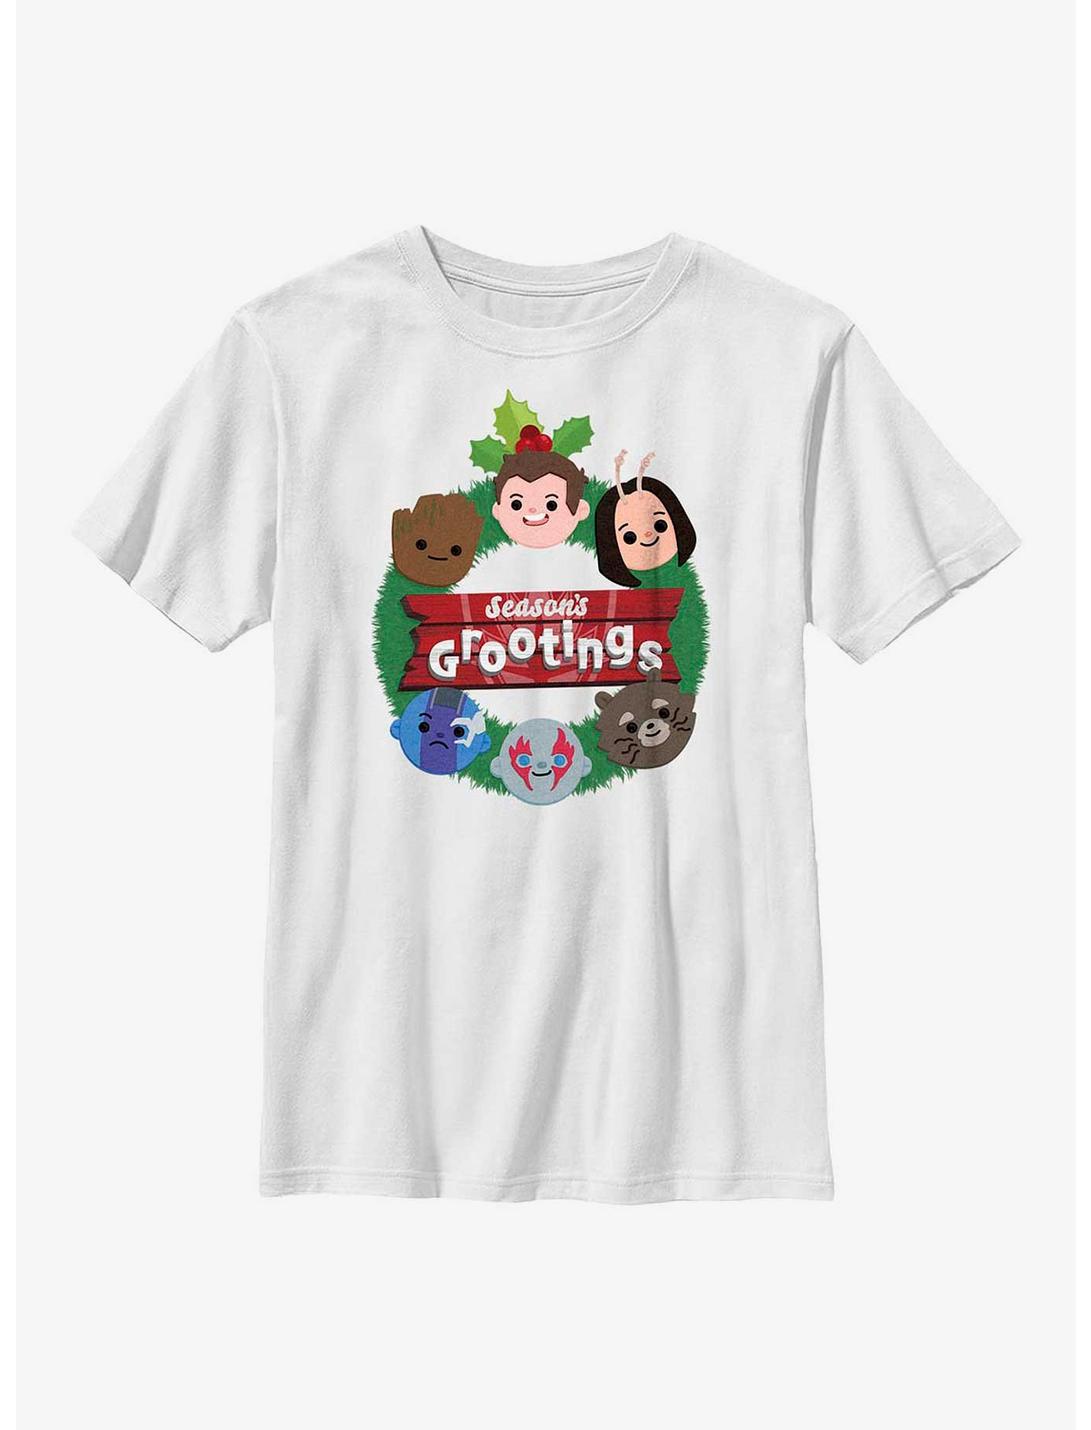 Marvel Guardians of the Galaxy Holiday Special Seasons Grootings Youth T-Shirt, WHITE, hi-res